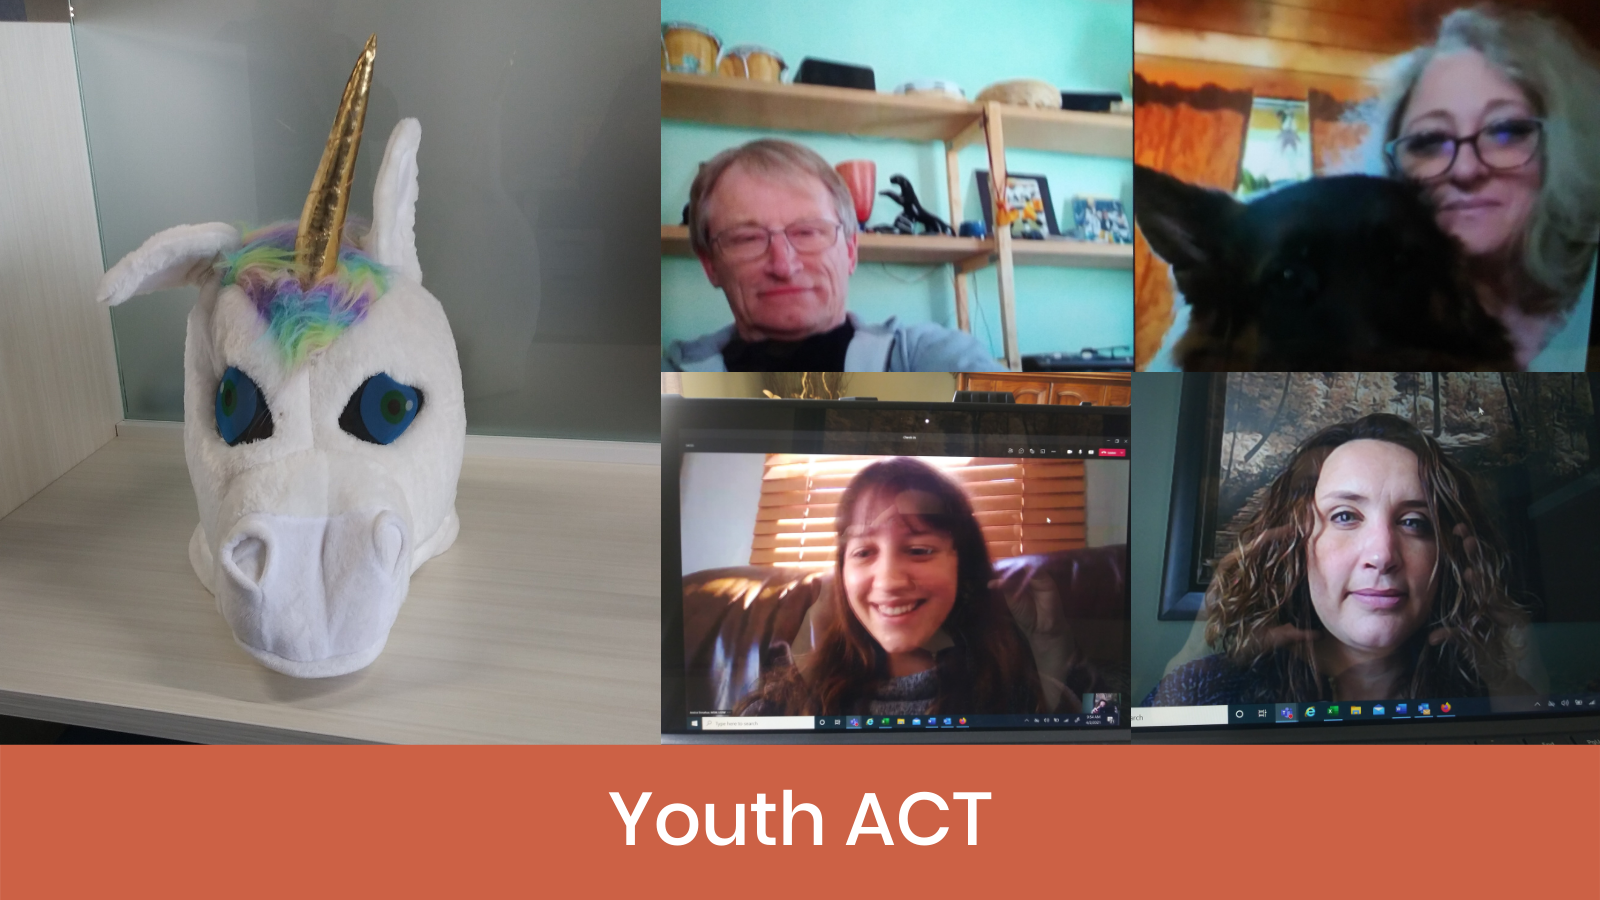 Members of the Youth ACT Team meeting digitally, plus a plush unicorn (their mascot)